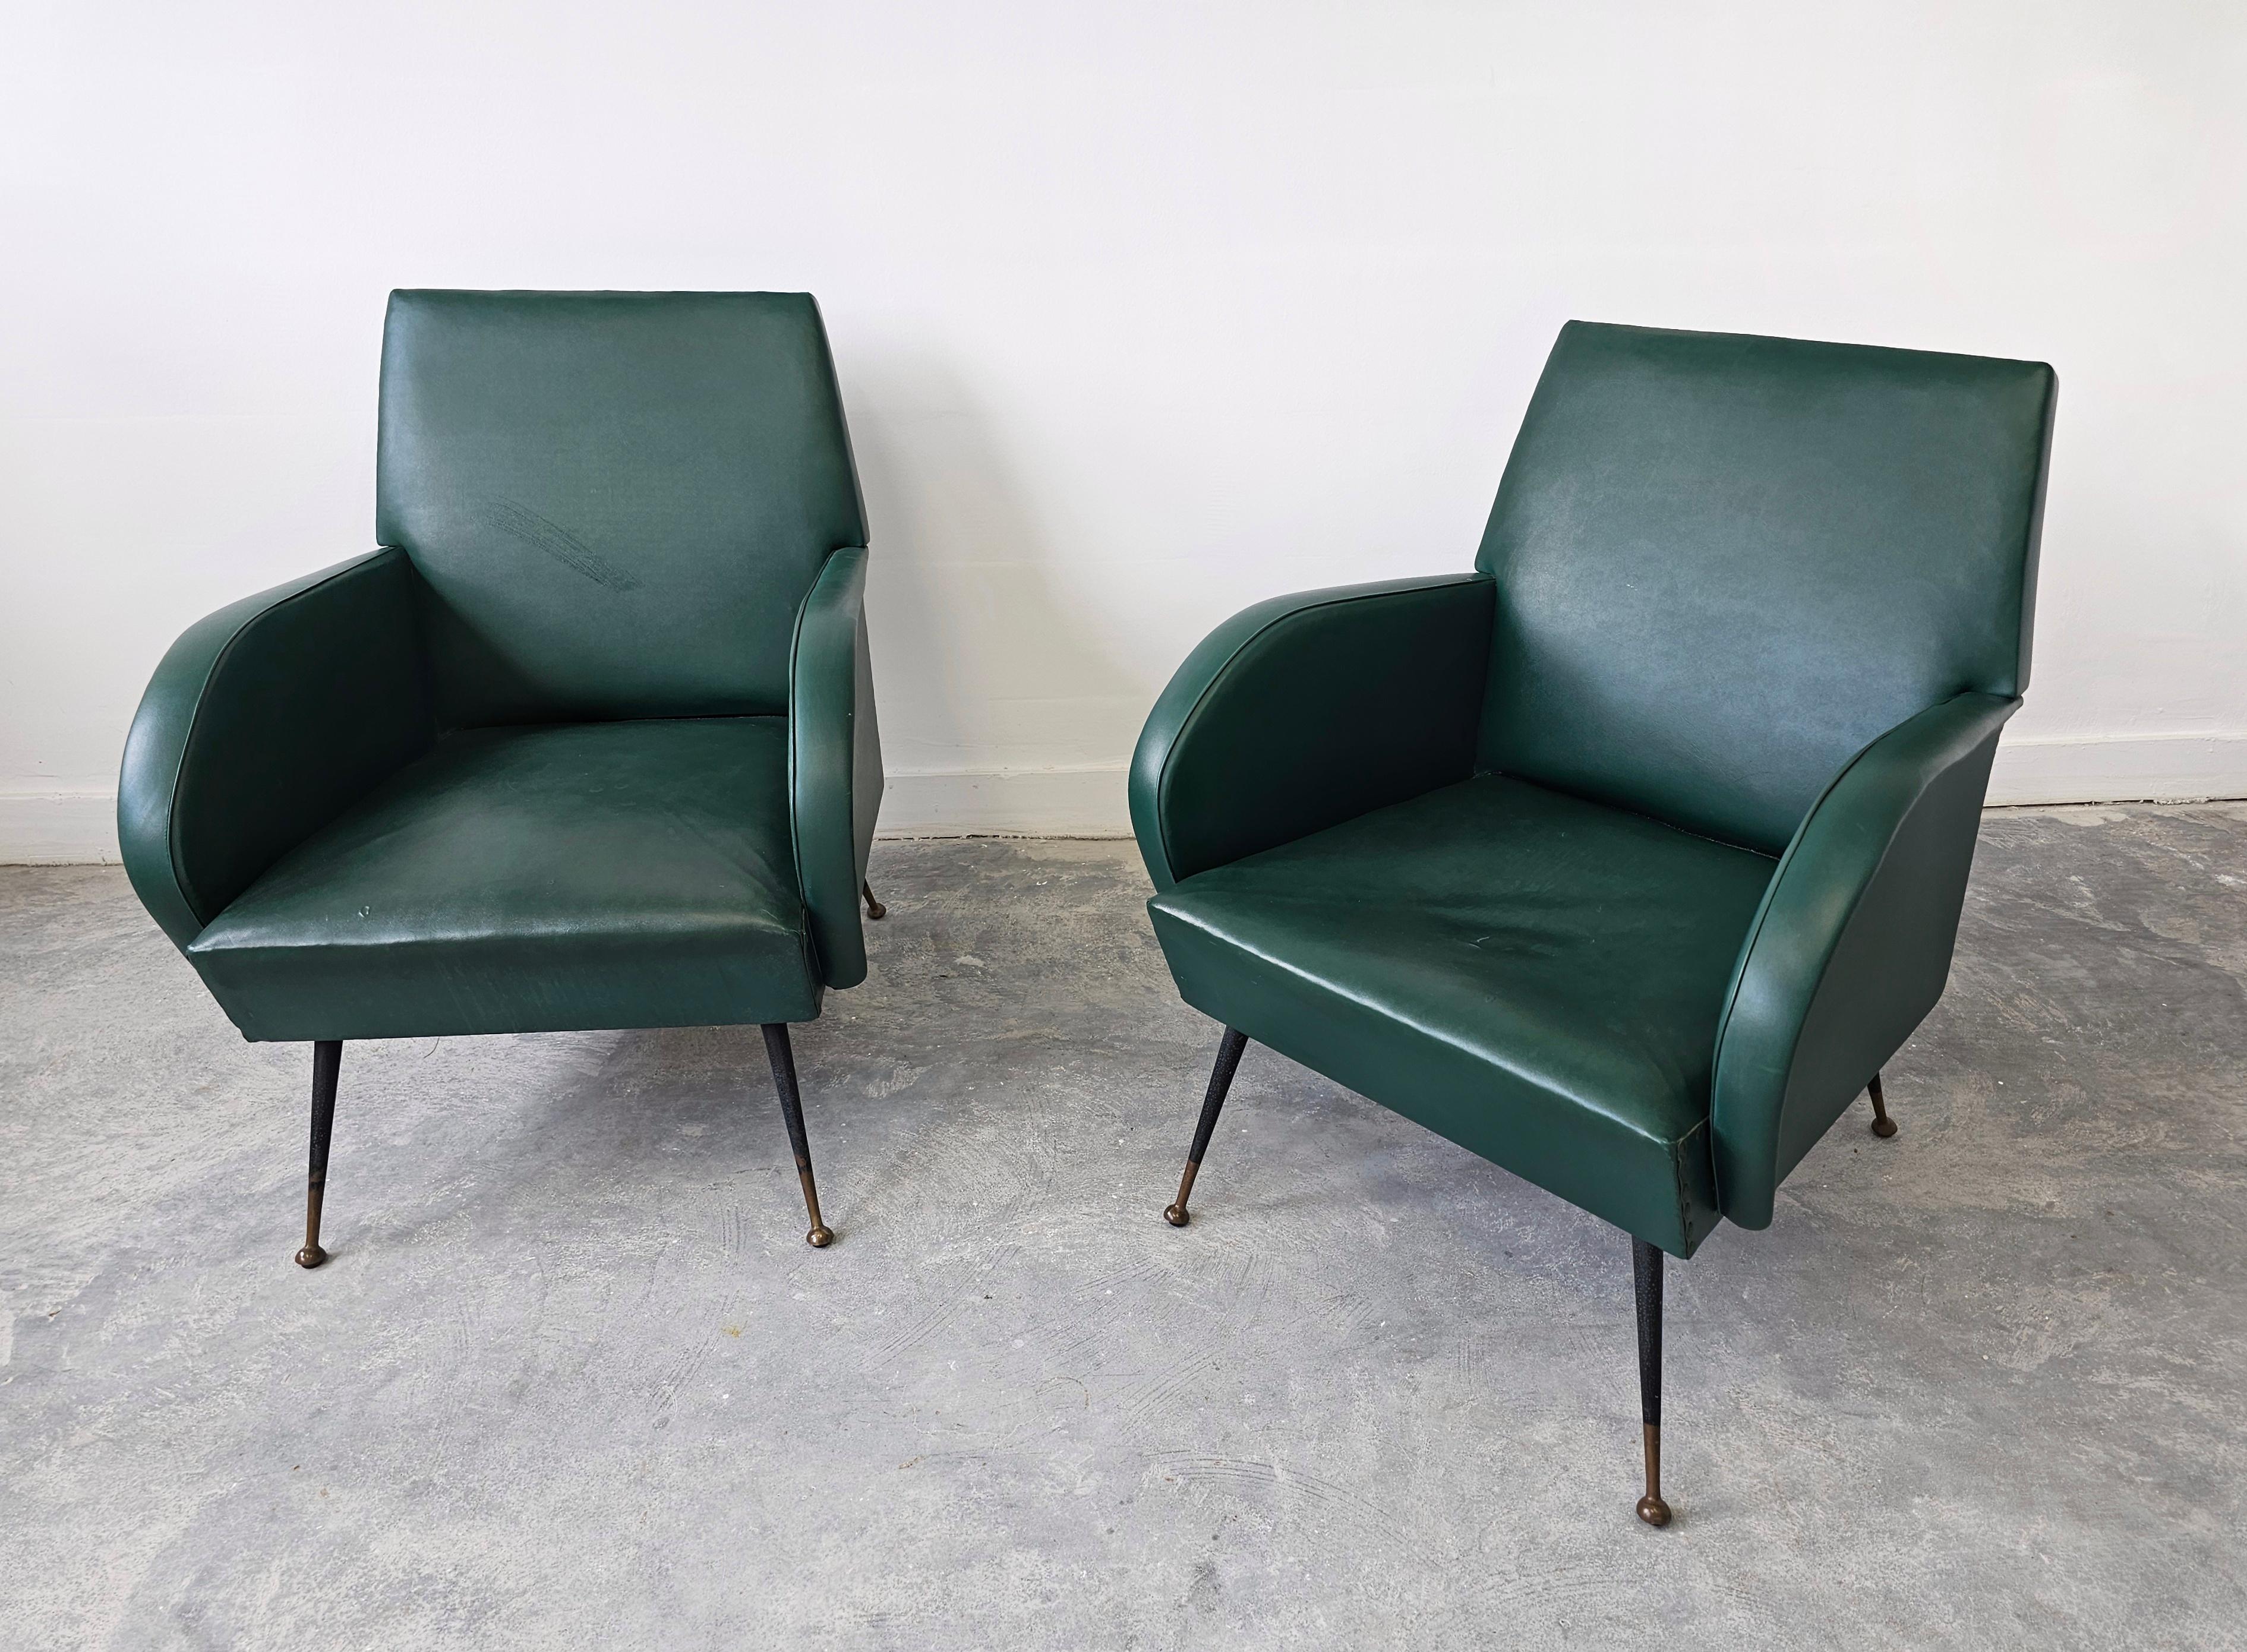 Pair of Mid Century Modern Armchairs in style of Marco Zanuso, Italy 1950s For Sale 3